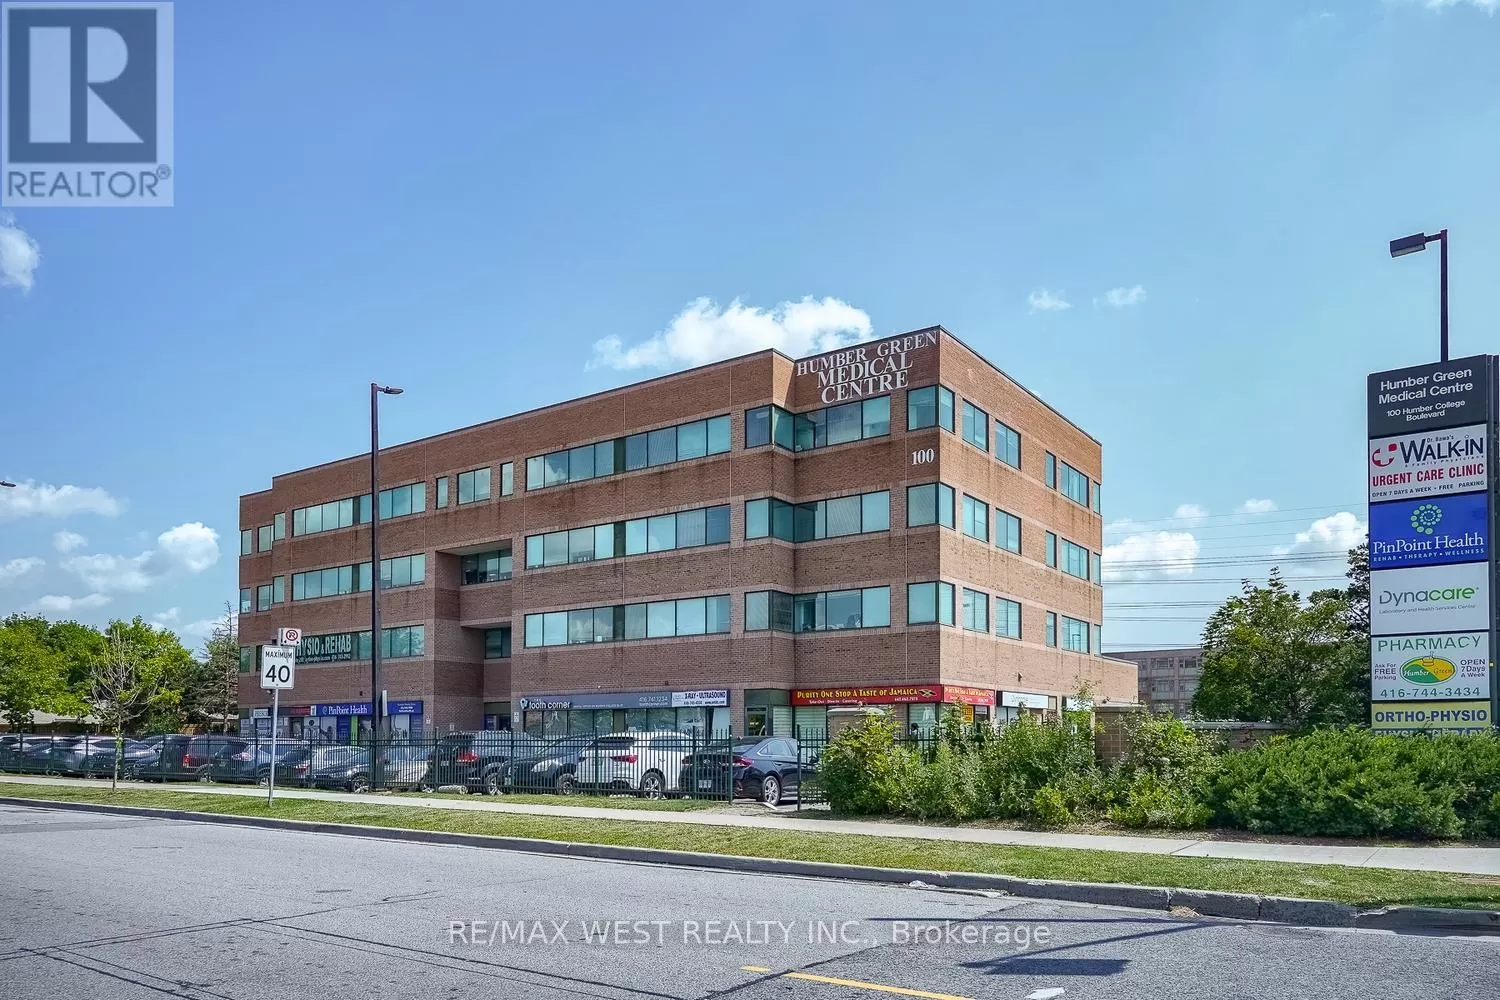 Offices for rent: #301 -100 Humber College Blvd, Toronto, Ontario M9V 5G4